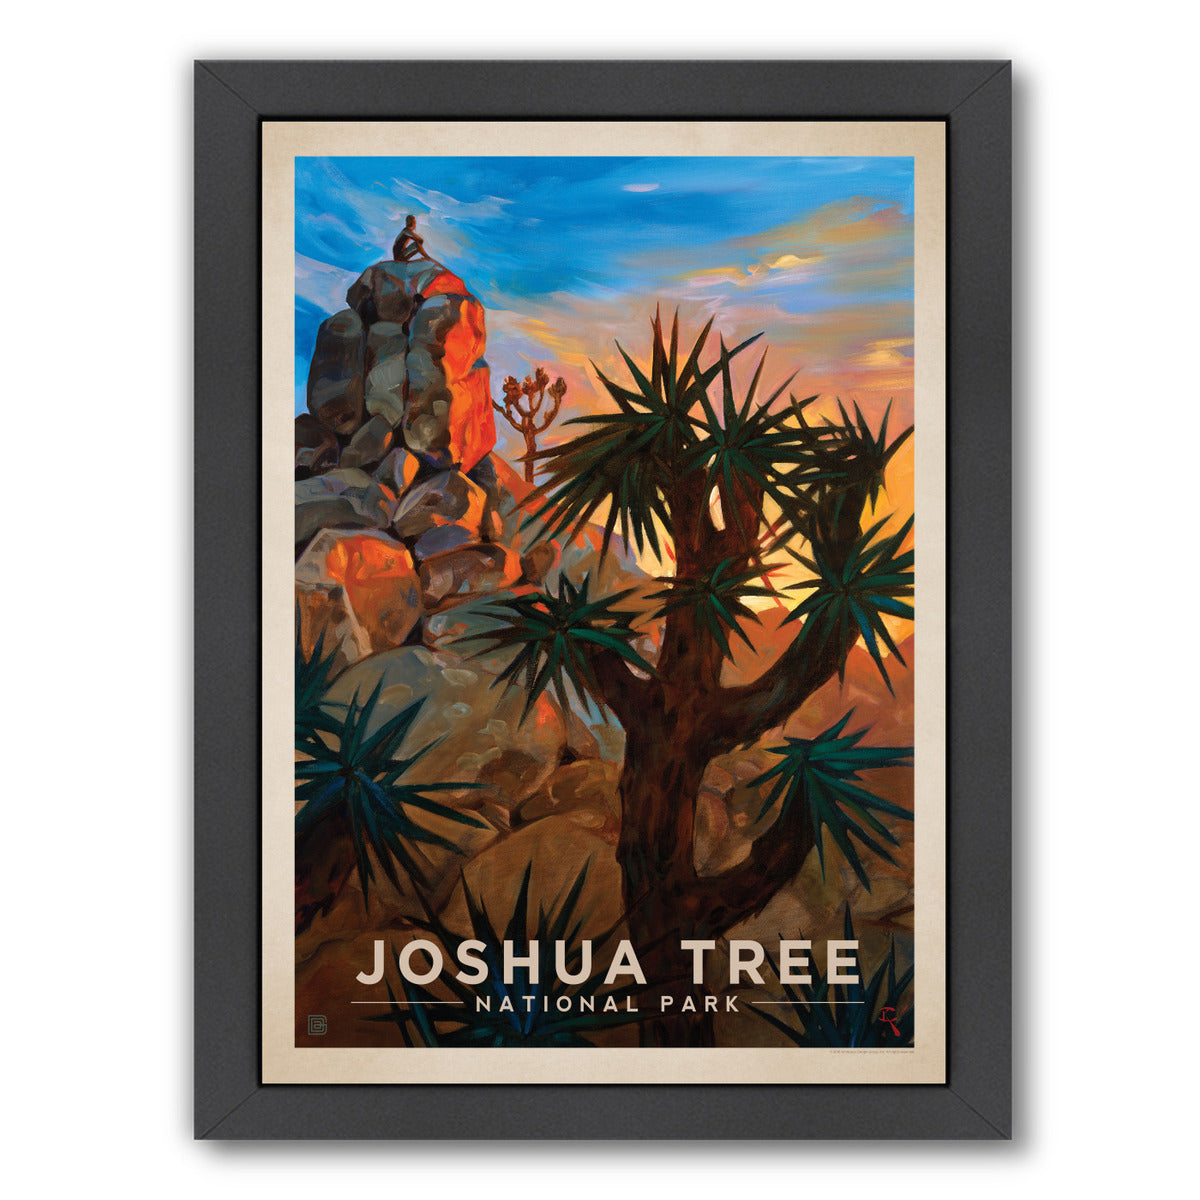 Joshua tree by Anderson Design Group Framed Print - Americanflat